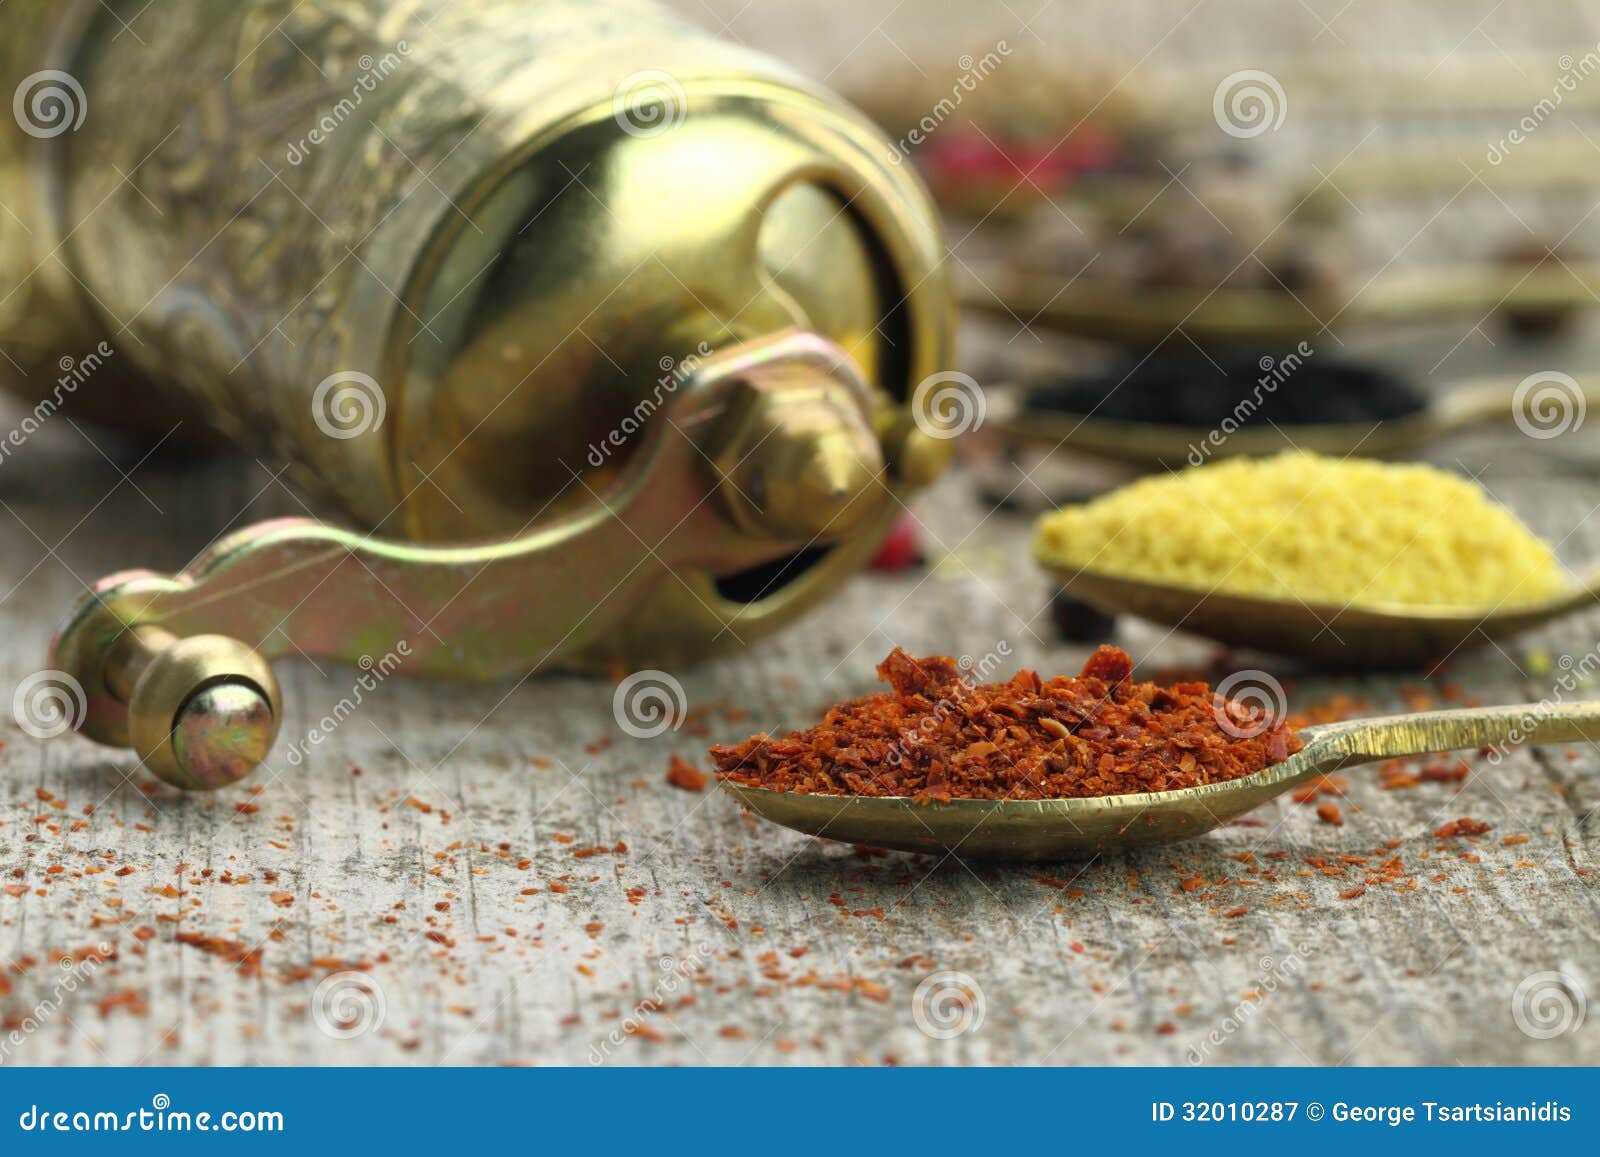 old spoons with spices